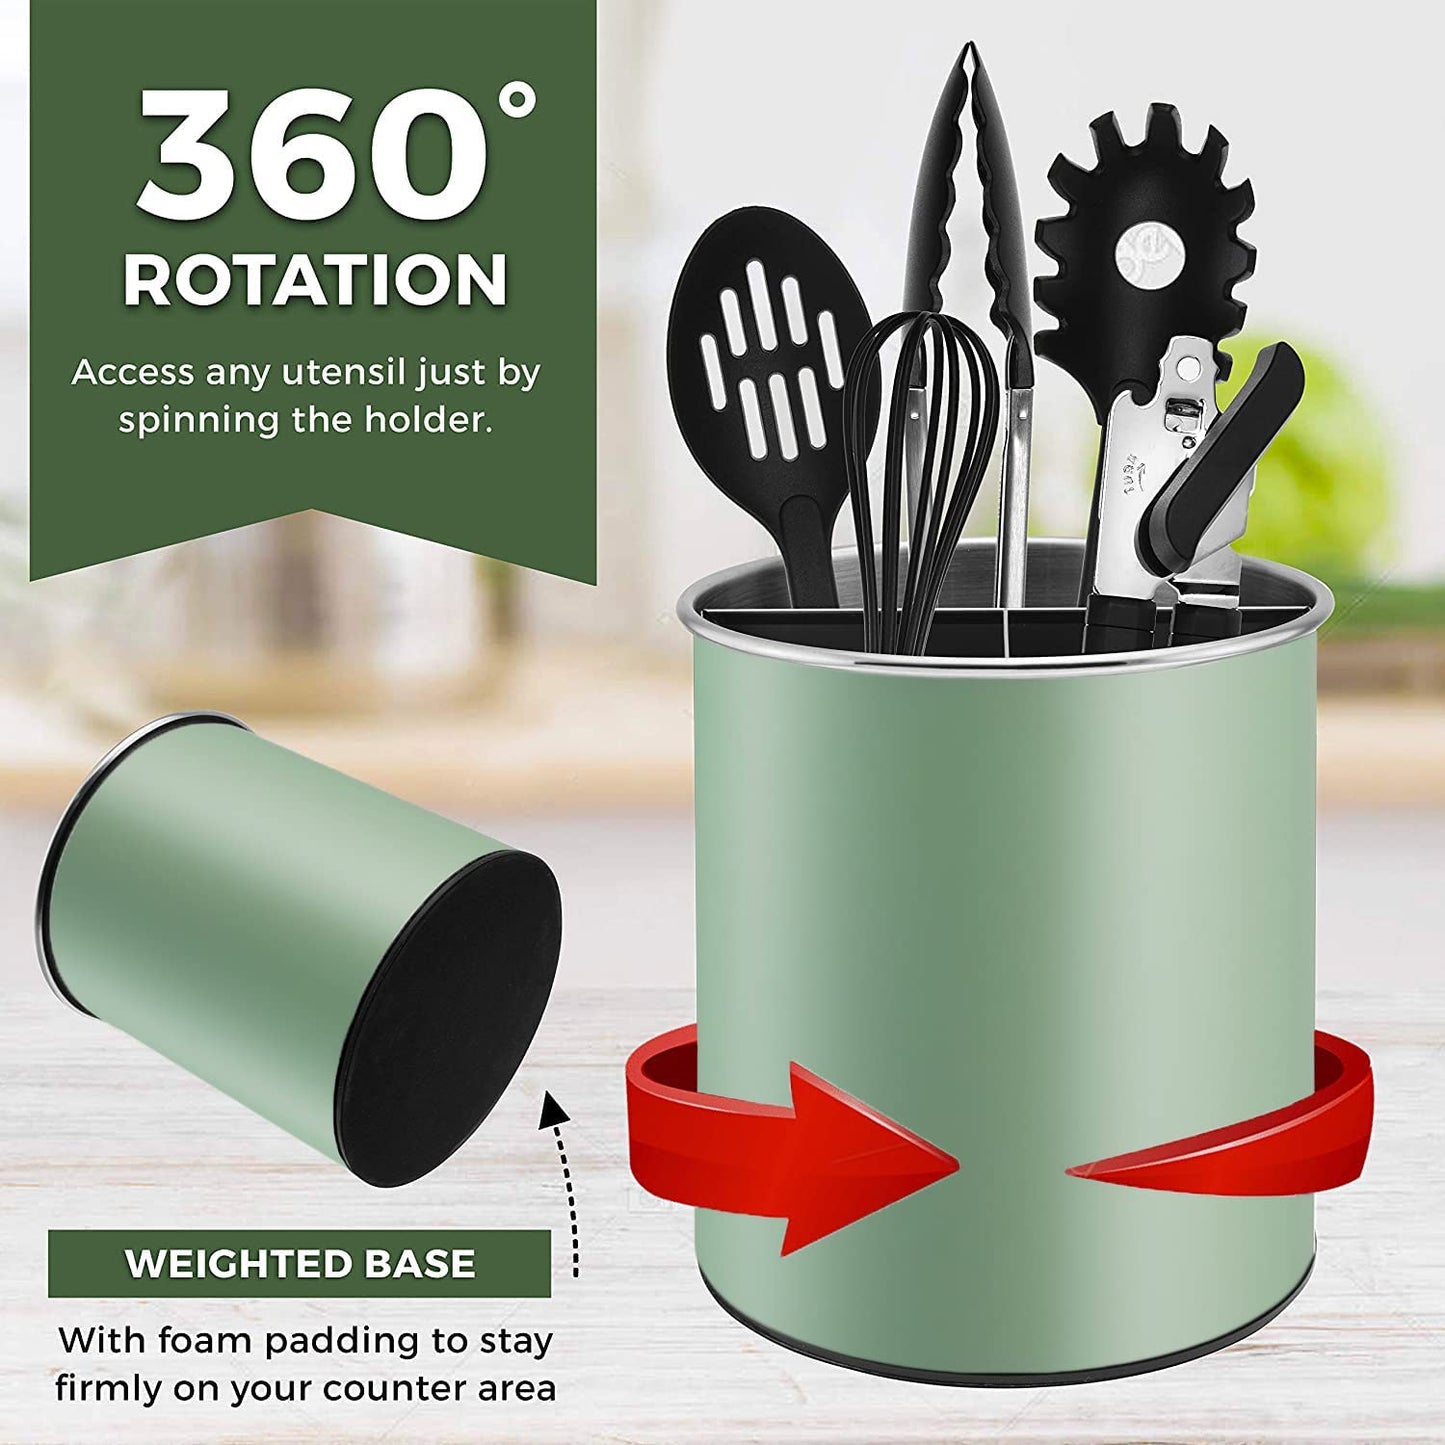 Bartnelli Extra Large Stainless Steel Kitchen Utensil Holder - 360° Rotating Utensil Caddy - Weighted Base for Stability - Countertop Organizer Crock With Removable Divider (SEA GREEN)